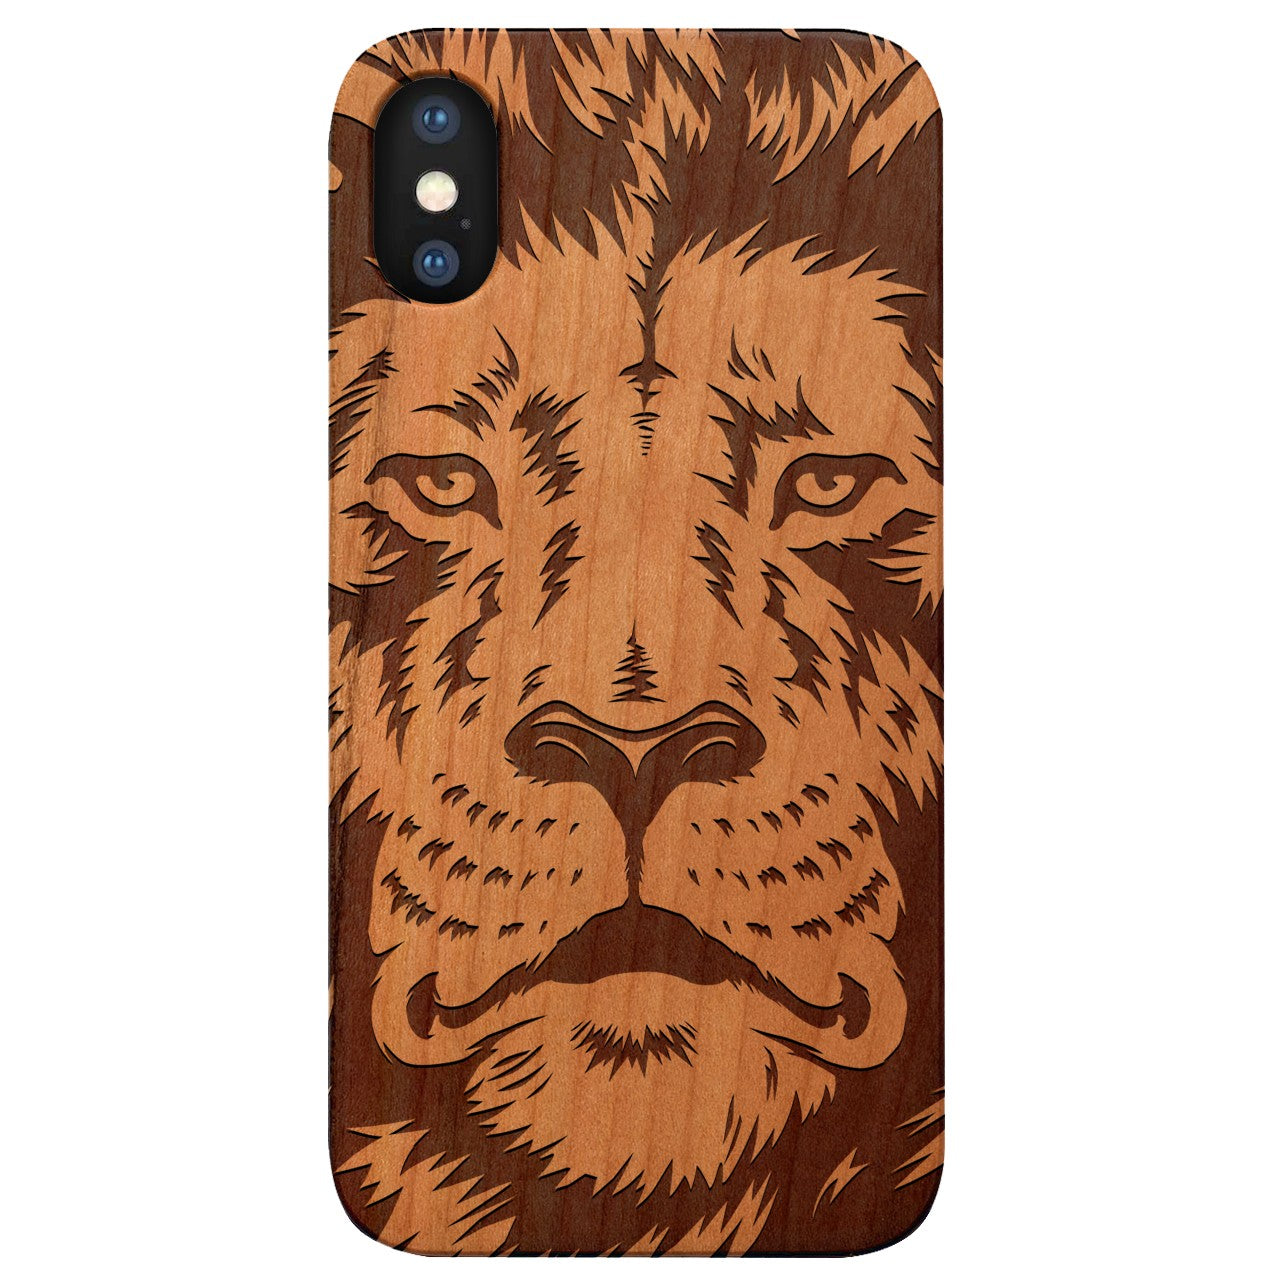  Lion Face 2 - Engraved - Wooden Phone Case - IPhone 13 Models